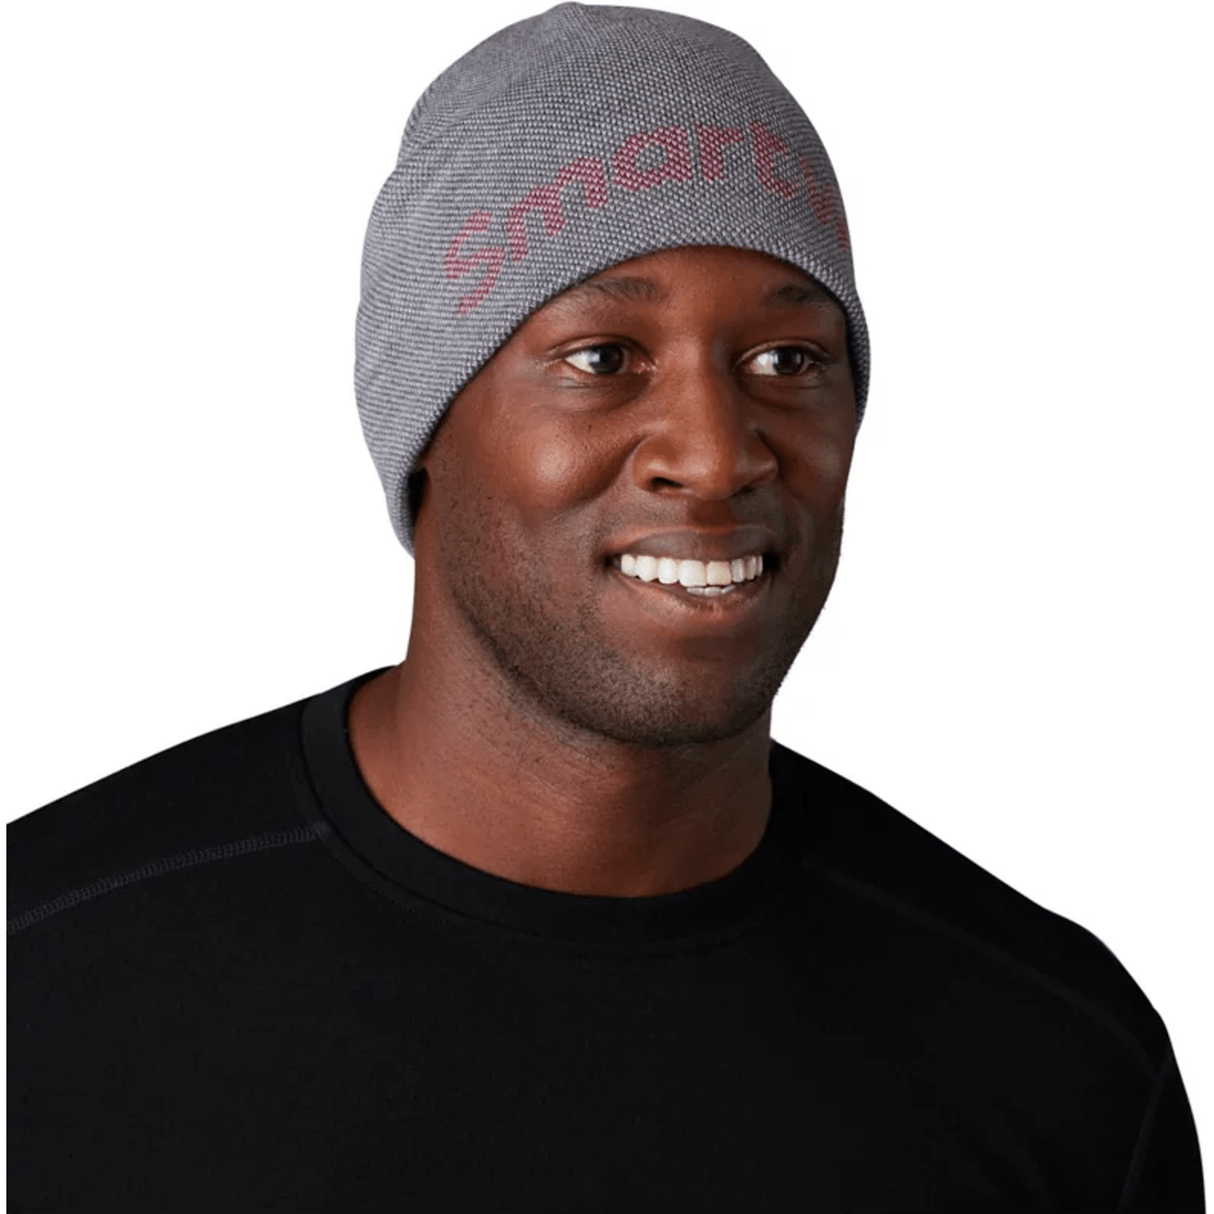 Smartwool Lid Logo Beanie  -  One Size Fits Most / Light Gray Heather